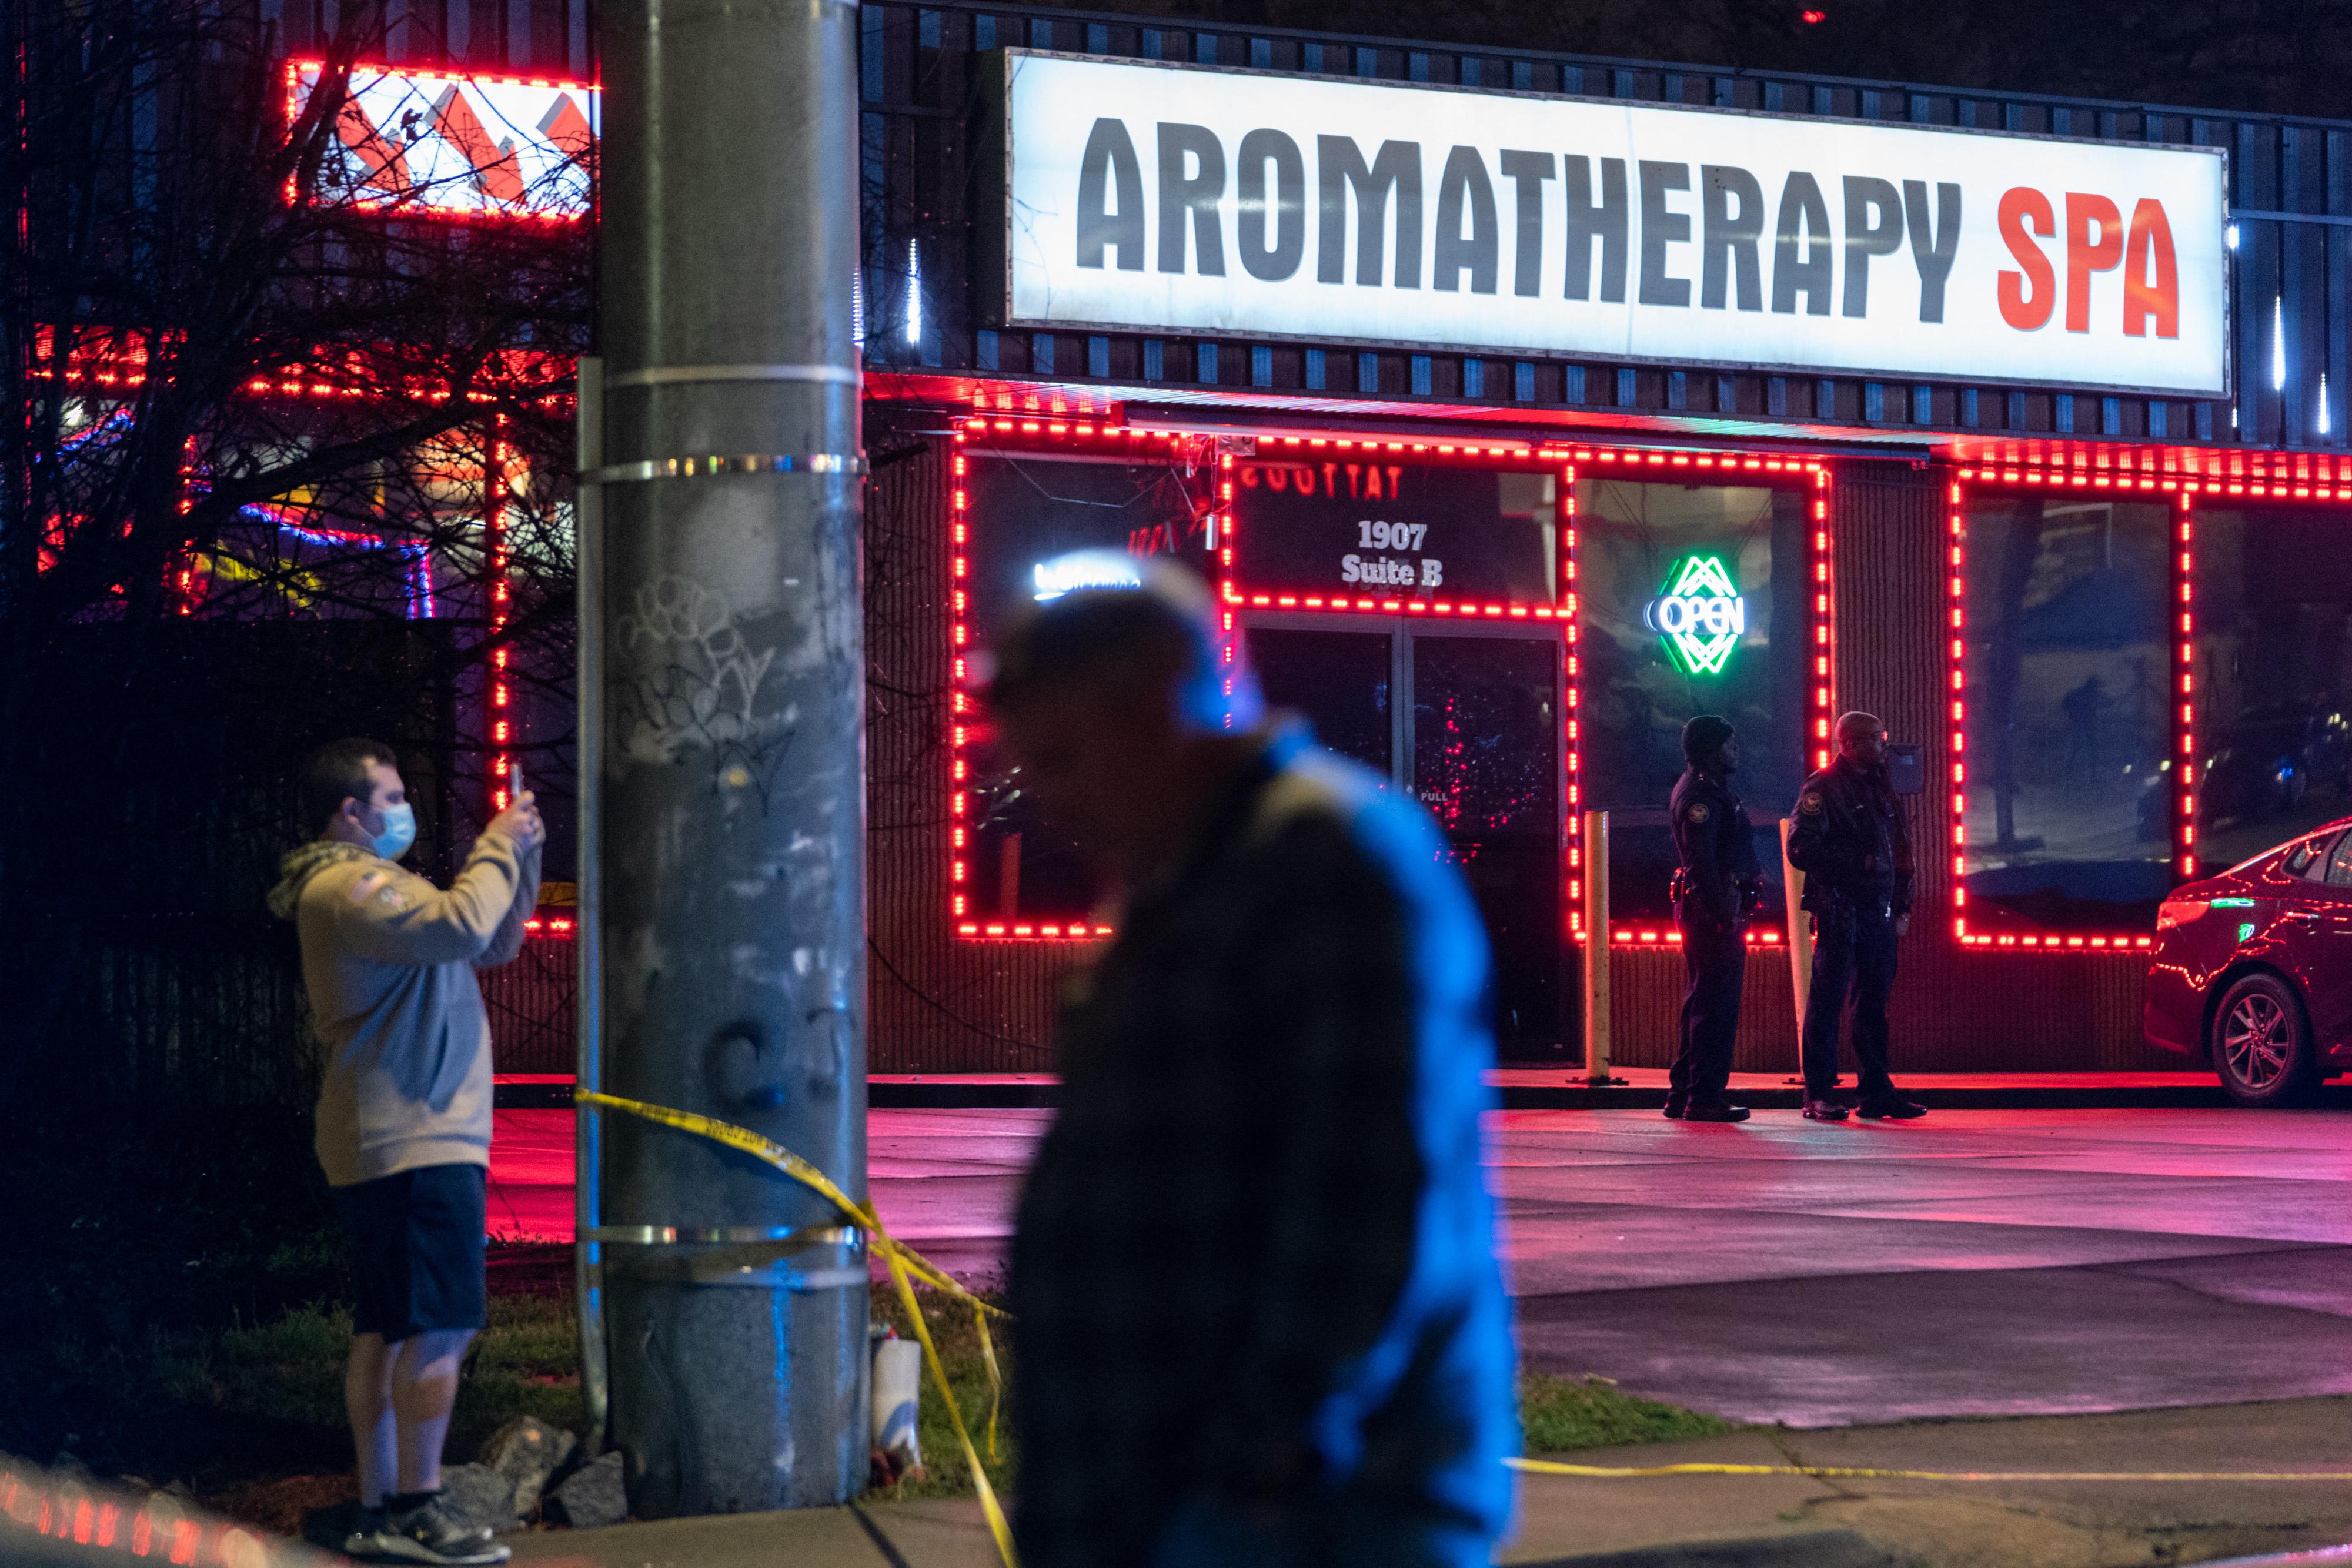 A brightly lit sign says "Aromatherapy Spa" on a building whose windows are outlined in red lights. Two law enforcement officers stand in front. It's dark outside, and a person walks in the foreground.